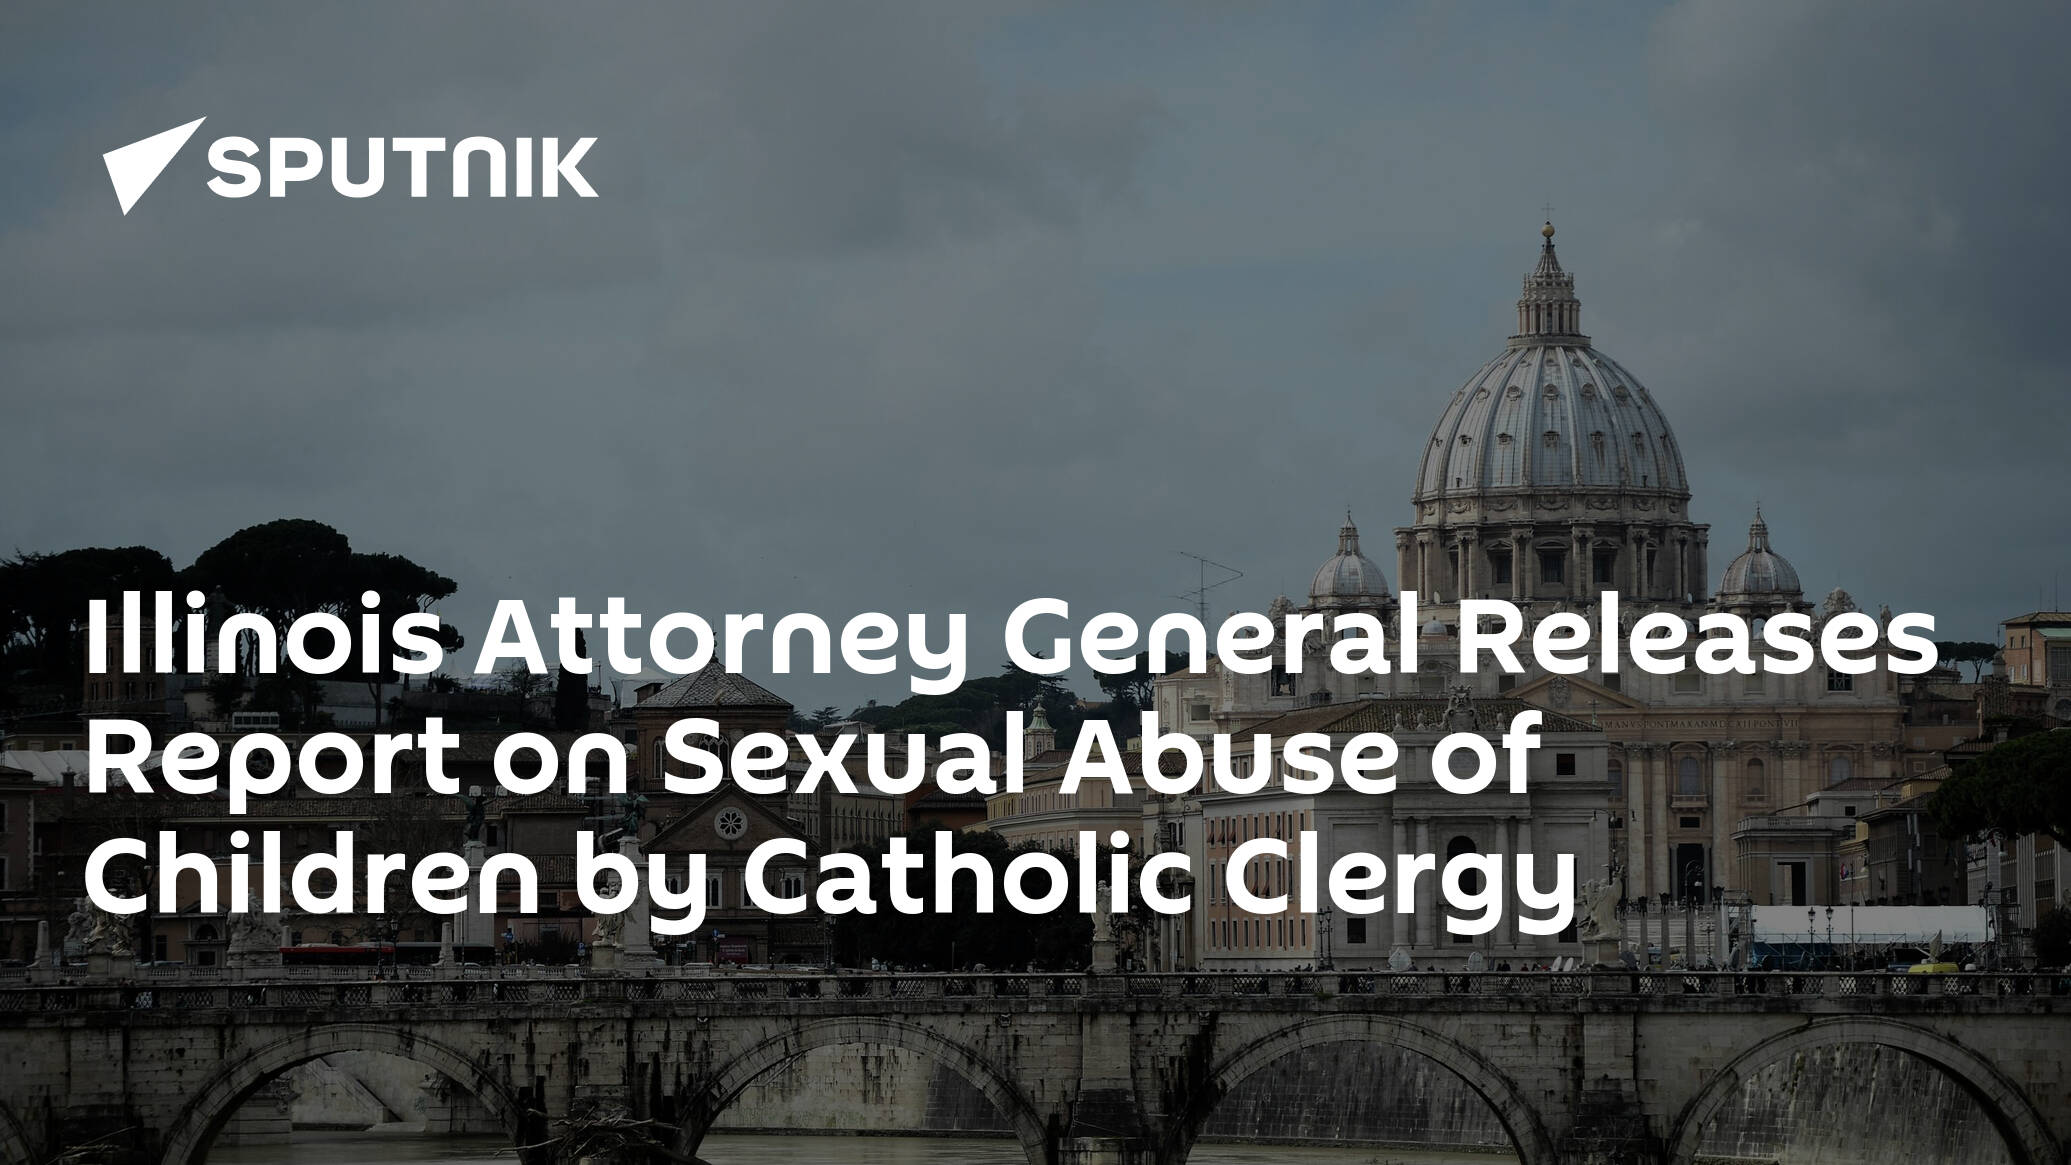 Illinois Attorney General Releases Report on Sexual Abuse of Children by Catholic Clergy